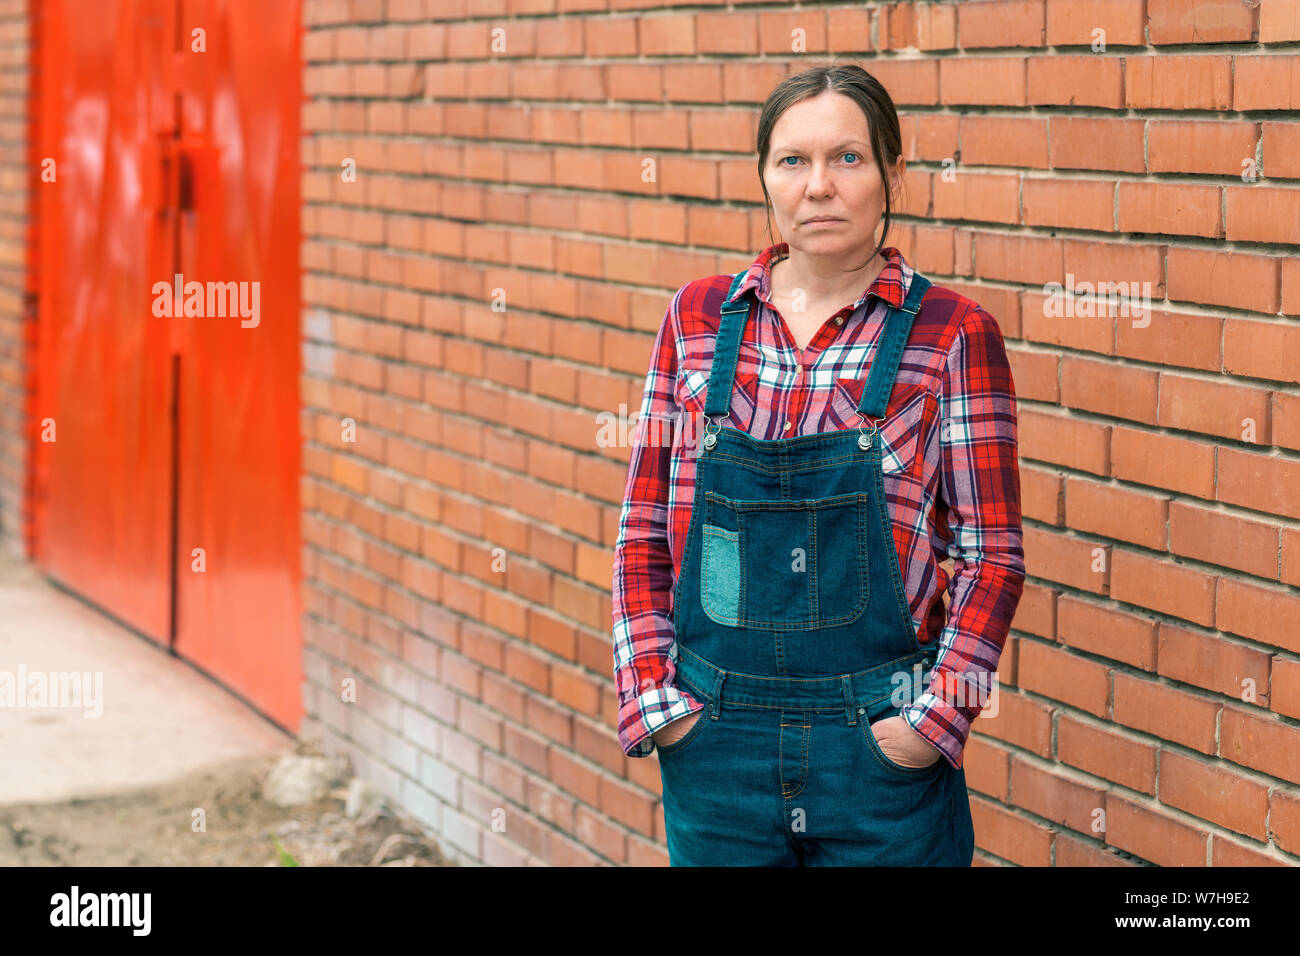 Confident serious female farmer on the farm, portrait of woman in plaid shirt and jumpsuit overalls jeans with suspenders against the brick wall of fa Stock Photo